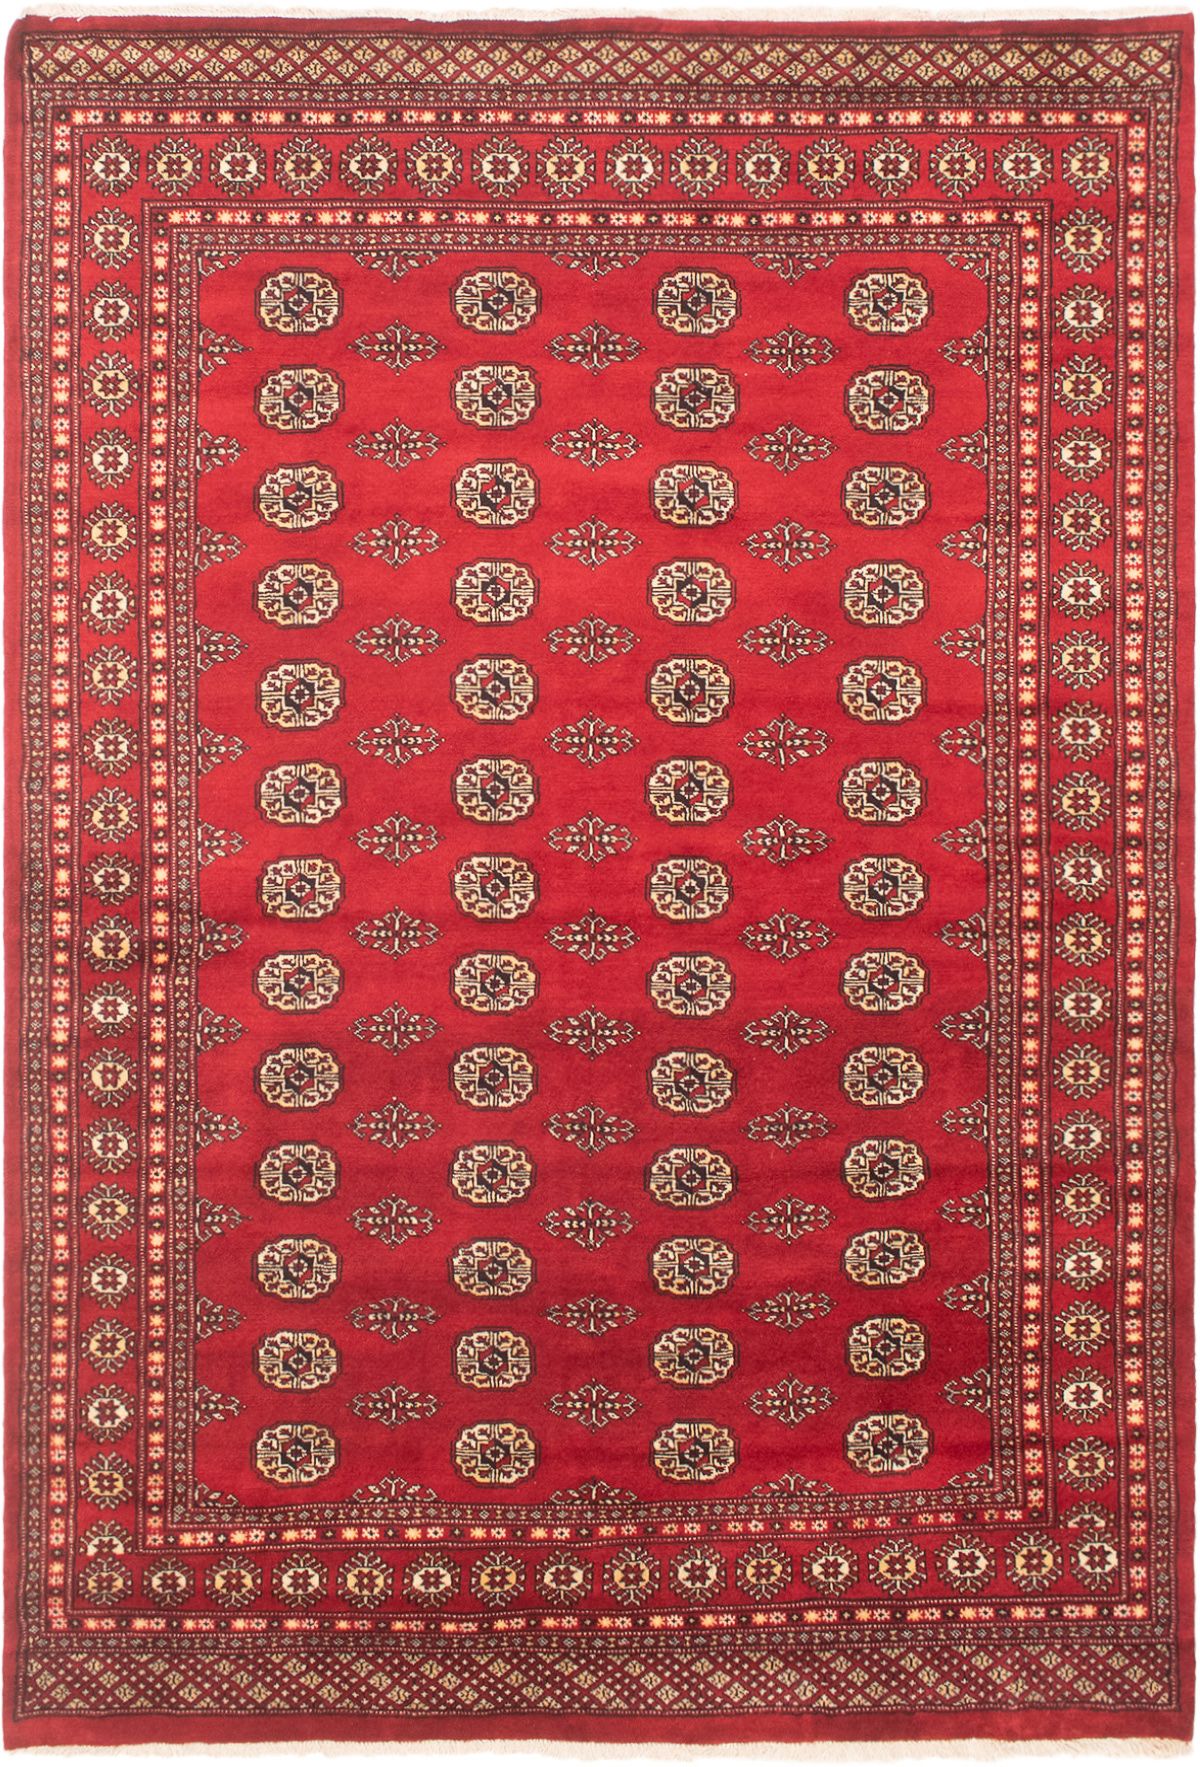 Hand-knotted Finest Peshawar Bokhara Red Wool Rug 5'11" x 8'8" Size: 5'11" x 8'8"  